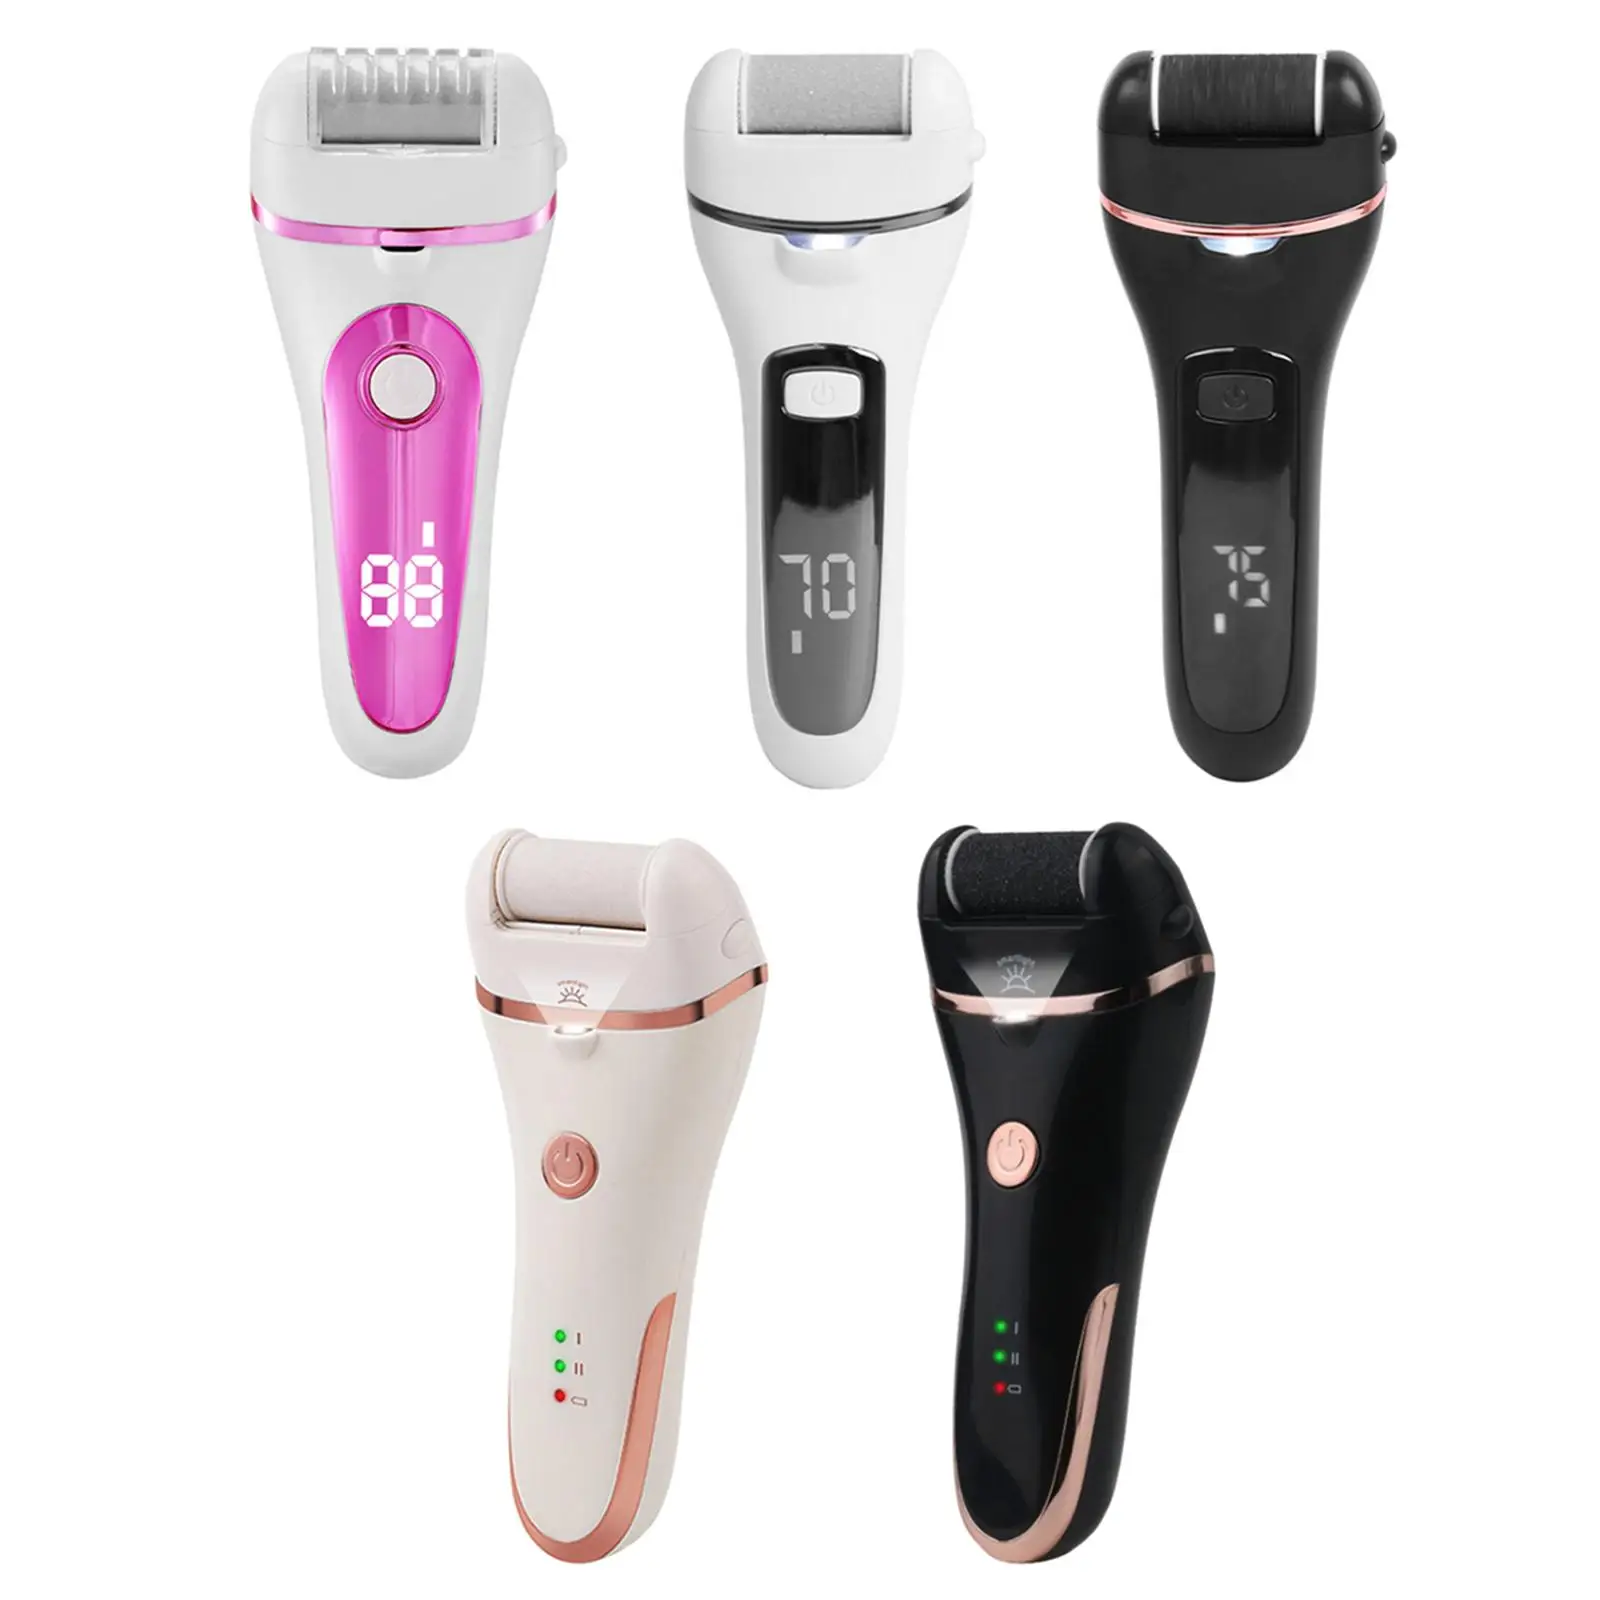 Portable Electric Feet Callus Remover Cordless 1200mAh Adjustable Speeds Foot File Feet Shaver for Dead / Hard Skin Feet Clean